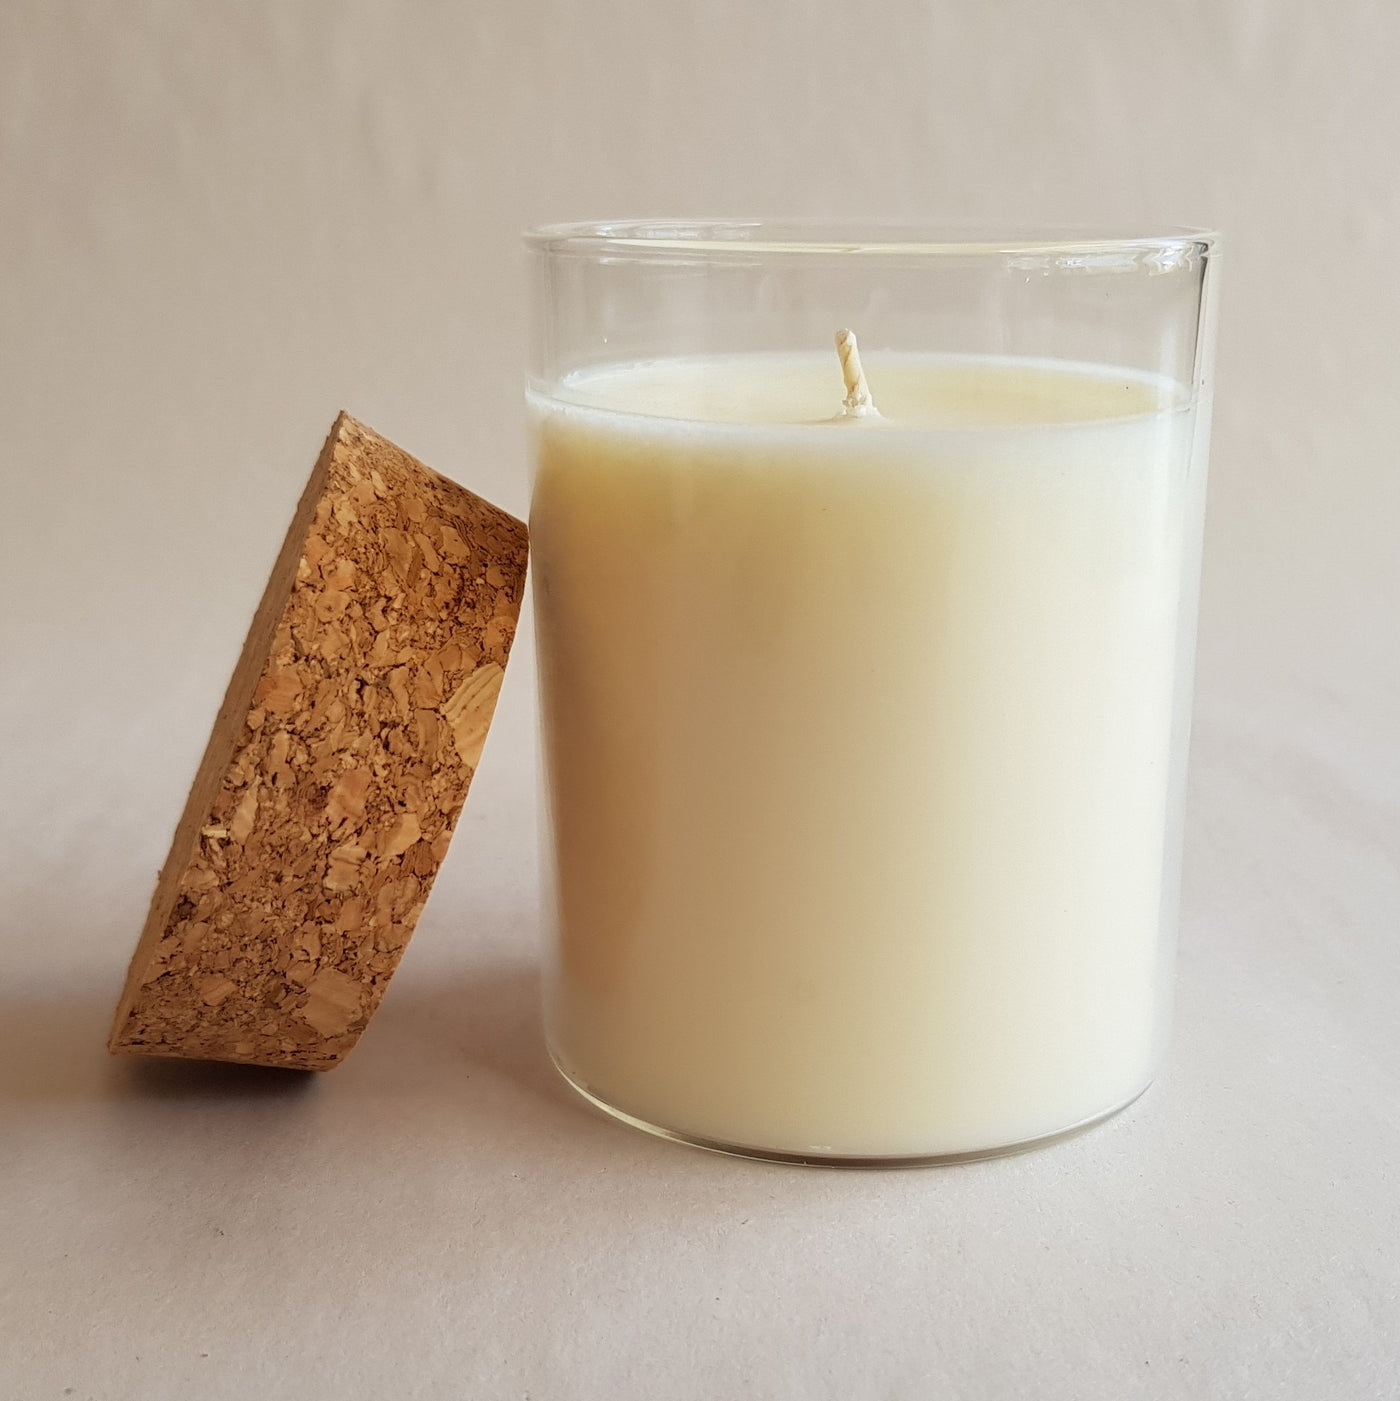 Soy Wax vs Beeswax – Selfmade Candle